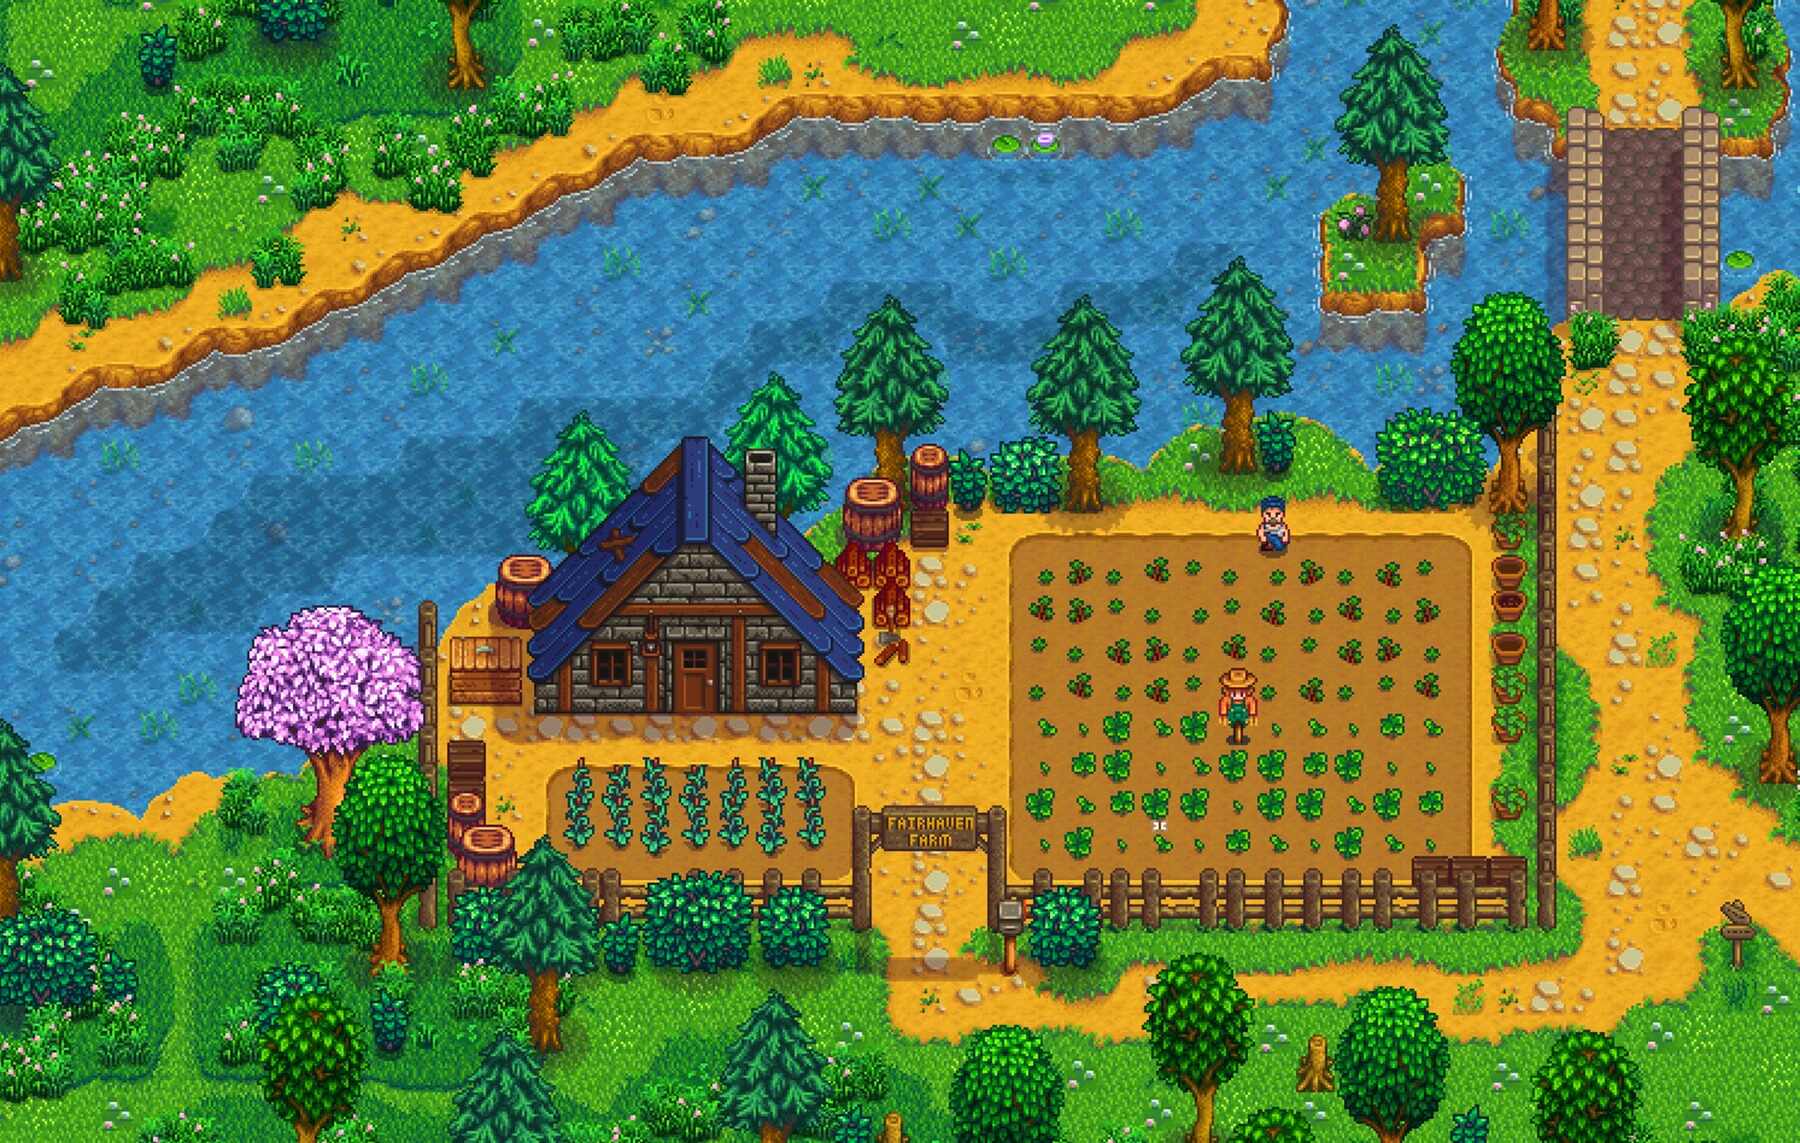 Stardew Valley Expanded Is An Enthralling Addition To The Base Game | Image Source: NexusMods